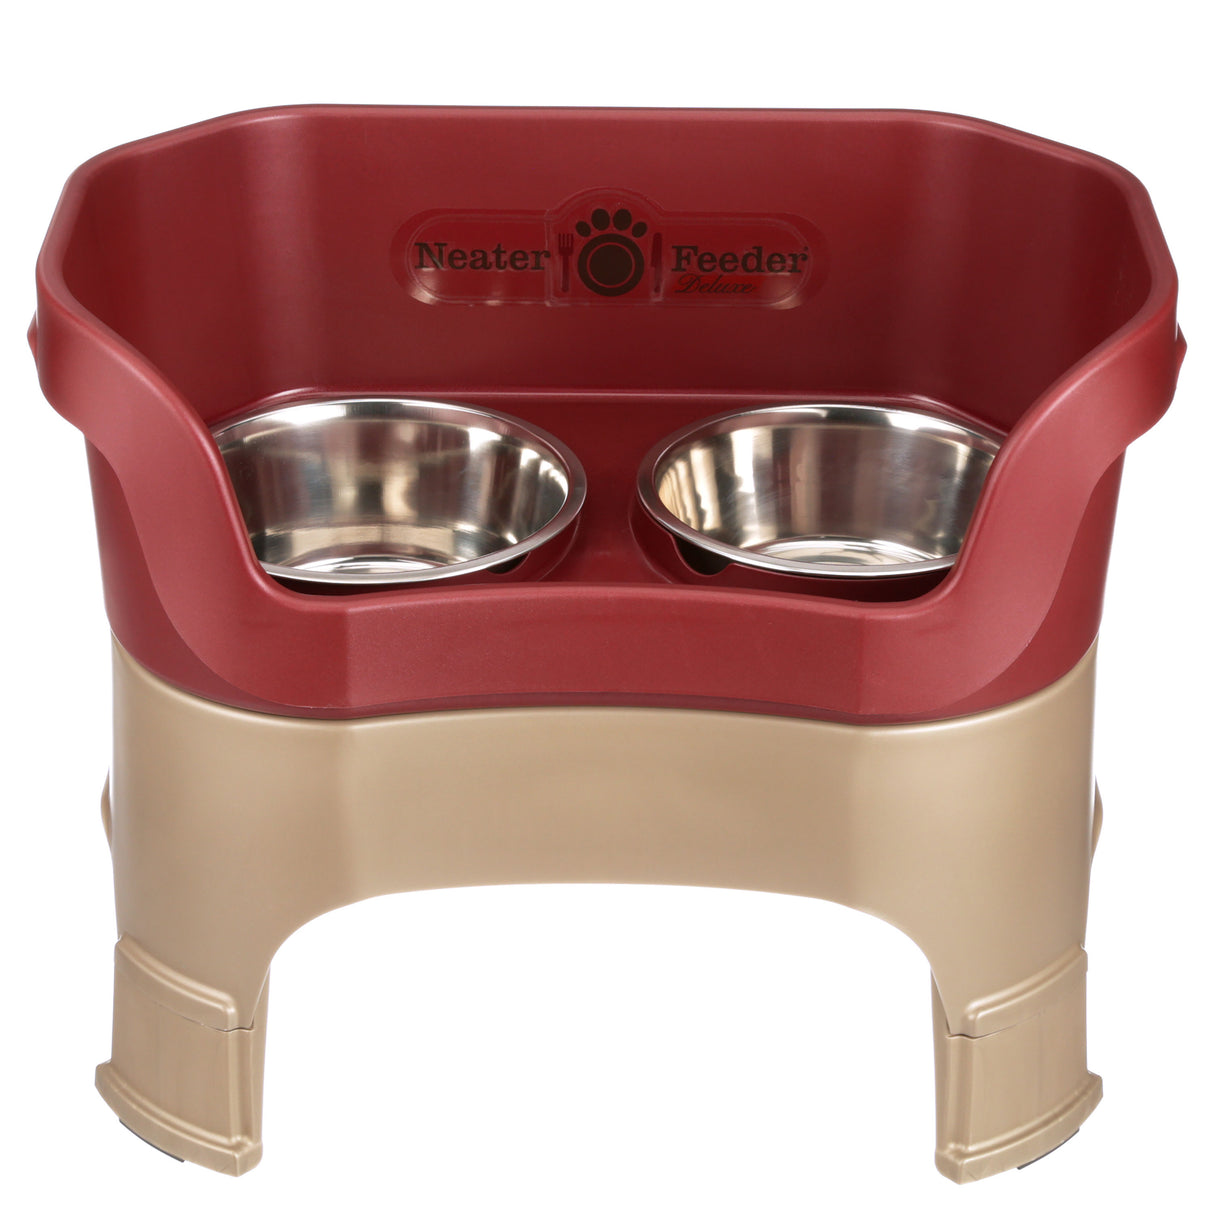 Deluxe Large Neater Feeder with leg extensions in Cranberry